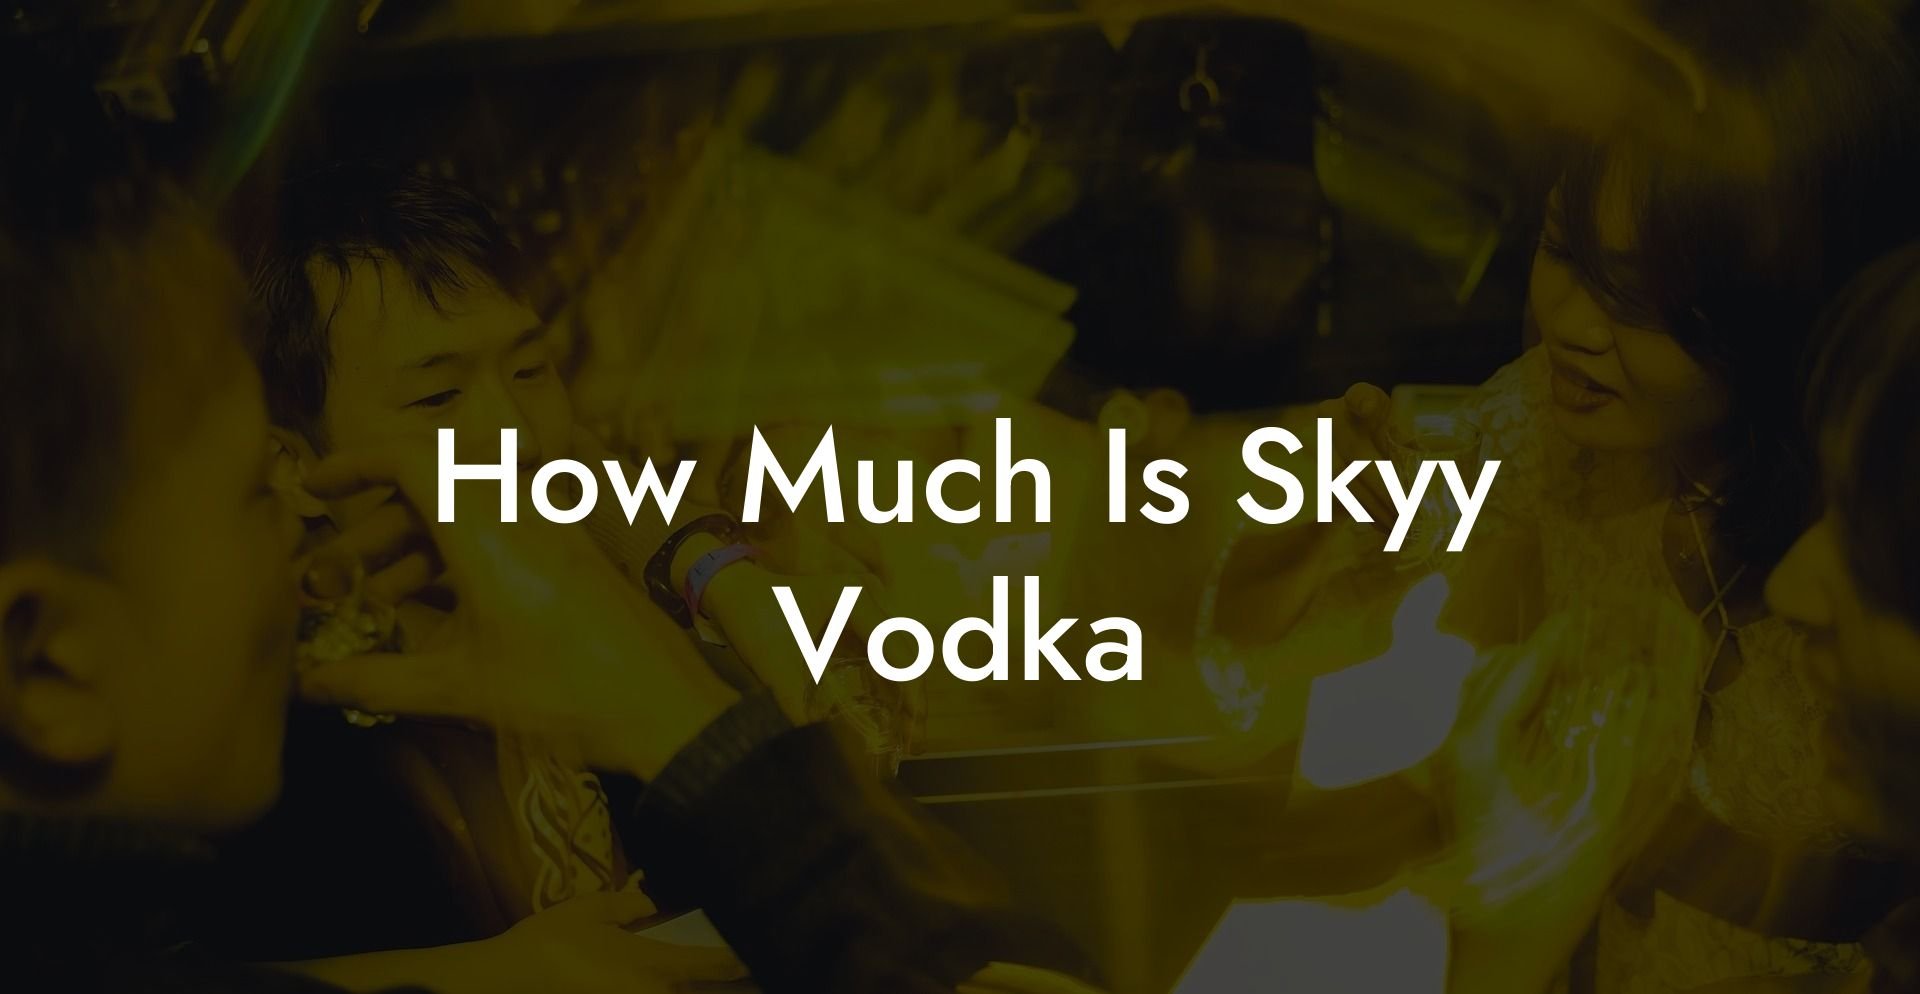 How Much Is Skyy Vodka